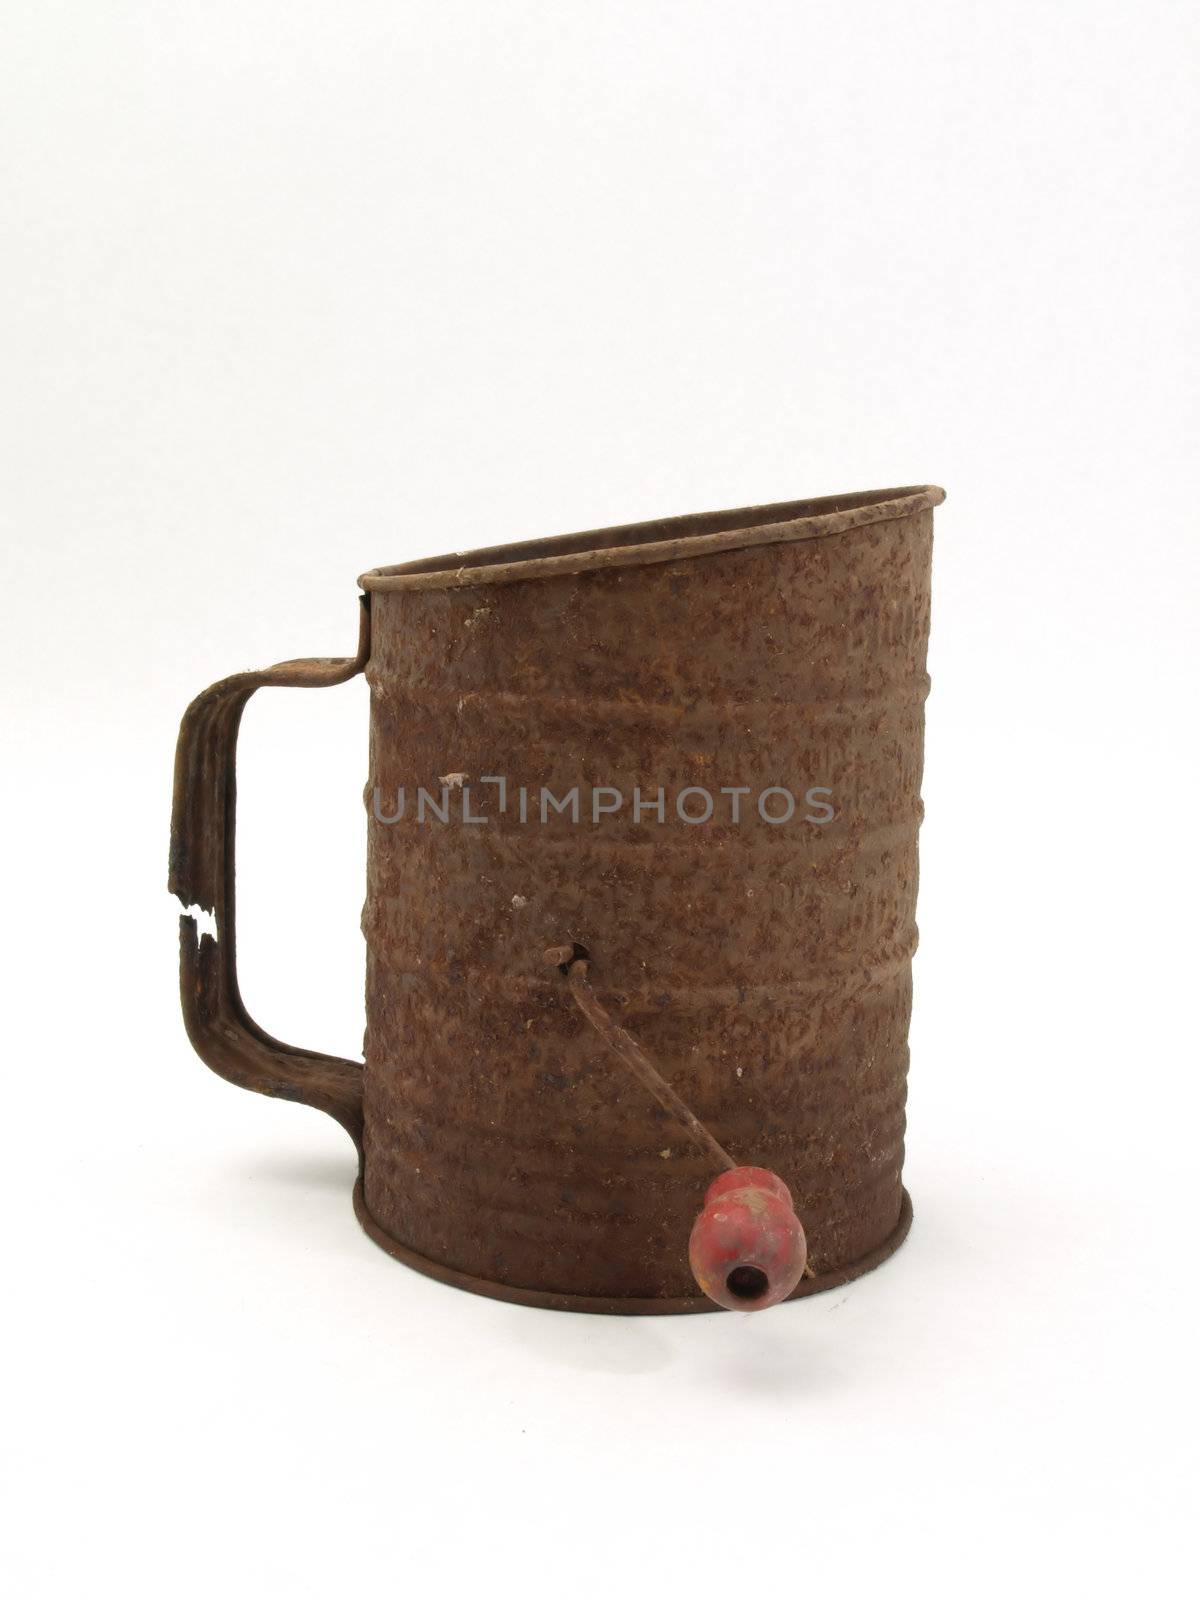 An old rusty flour sifter isolated on a white background.